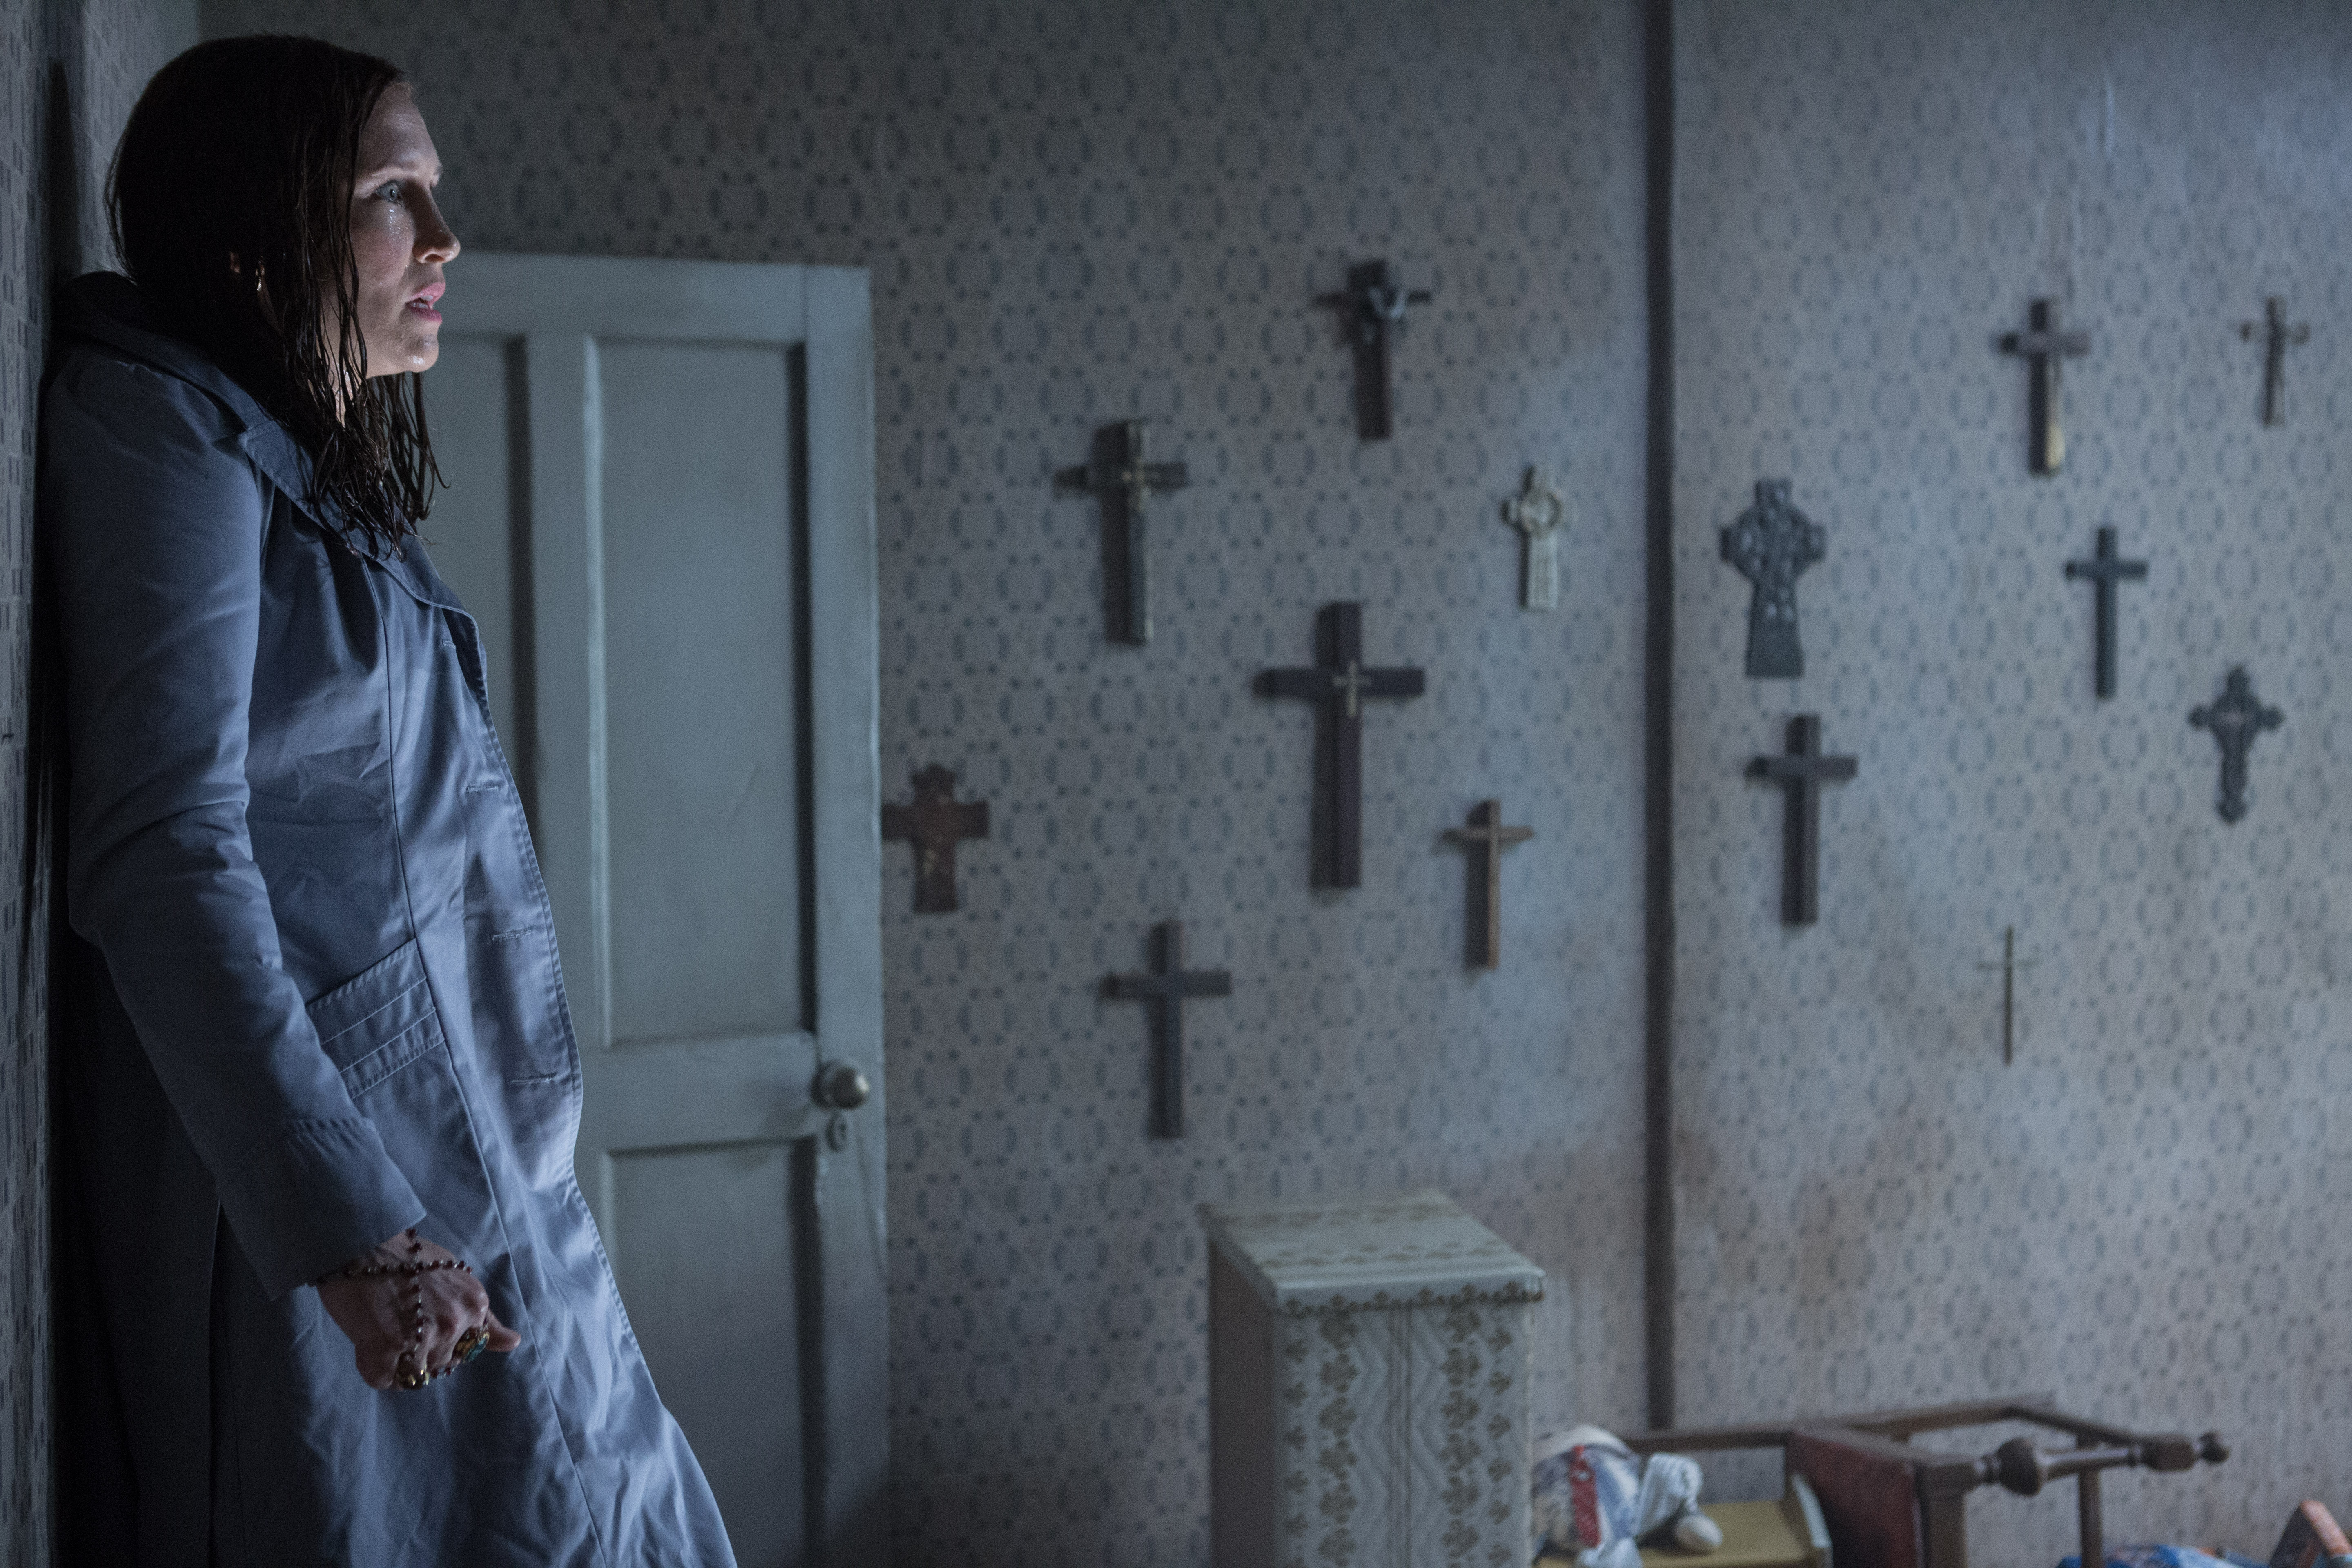 Movie The Conjuring 2 4k Ultra HD Wallpaper